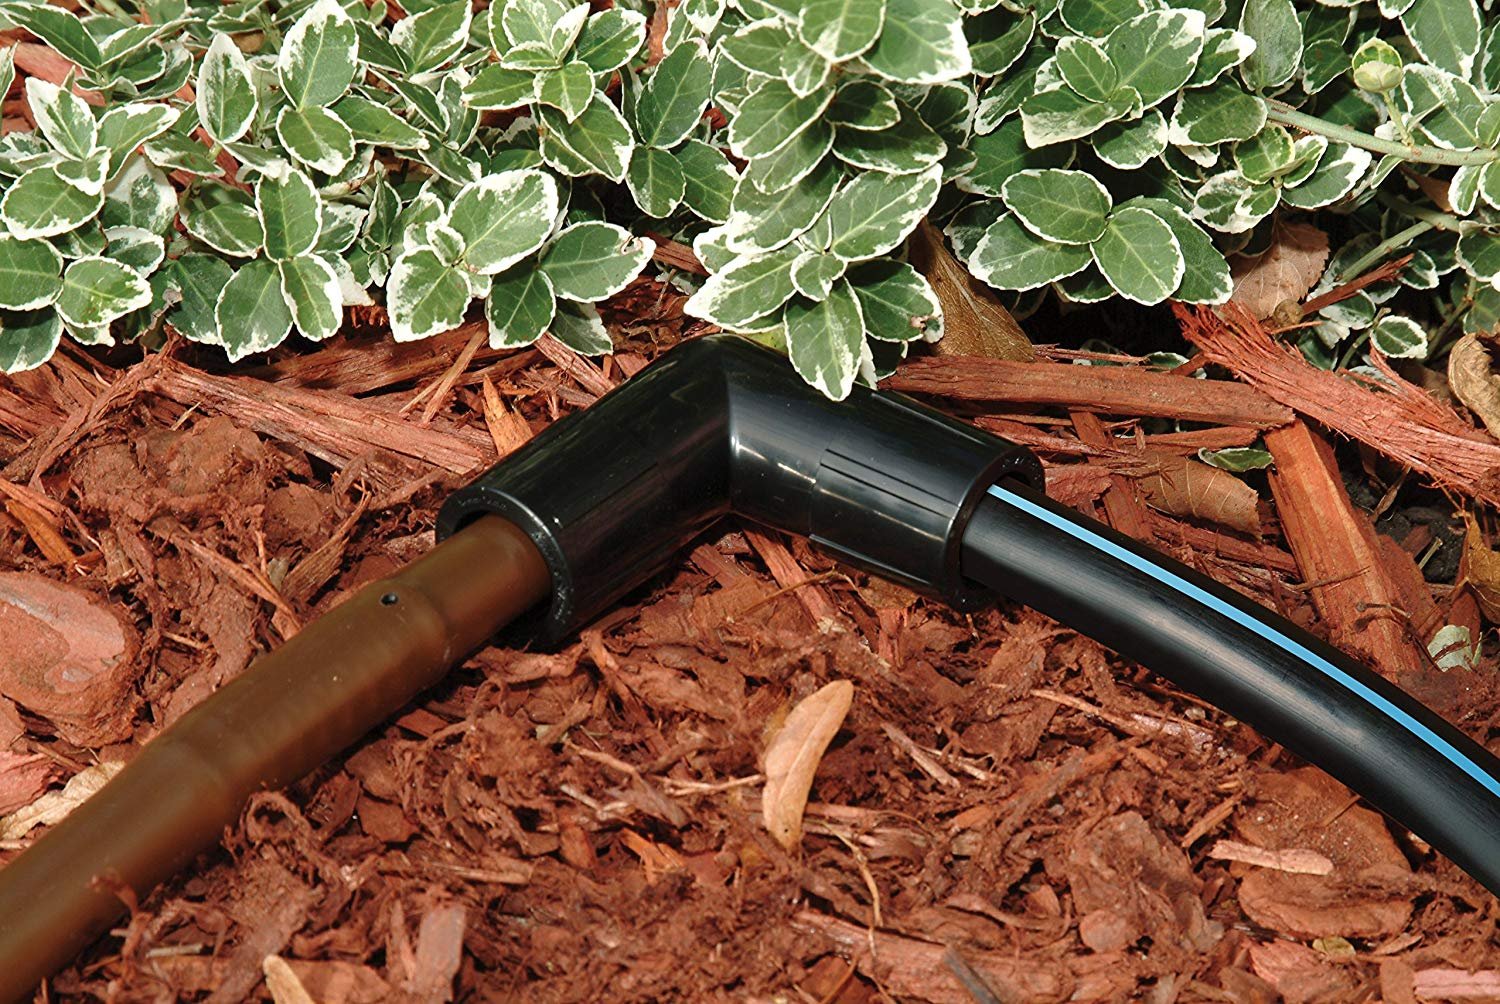 Rain Bird EFE25-1PS Drip Irrigation Easy Fit Universal Elbow, Fits All 1/2" and 5/8" Tubing - image 2 of 2